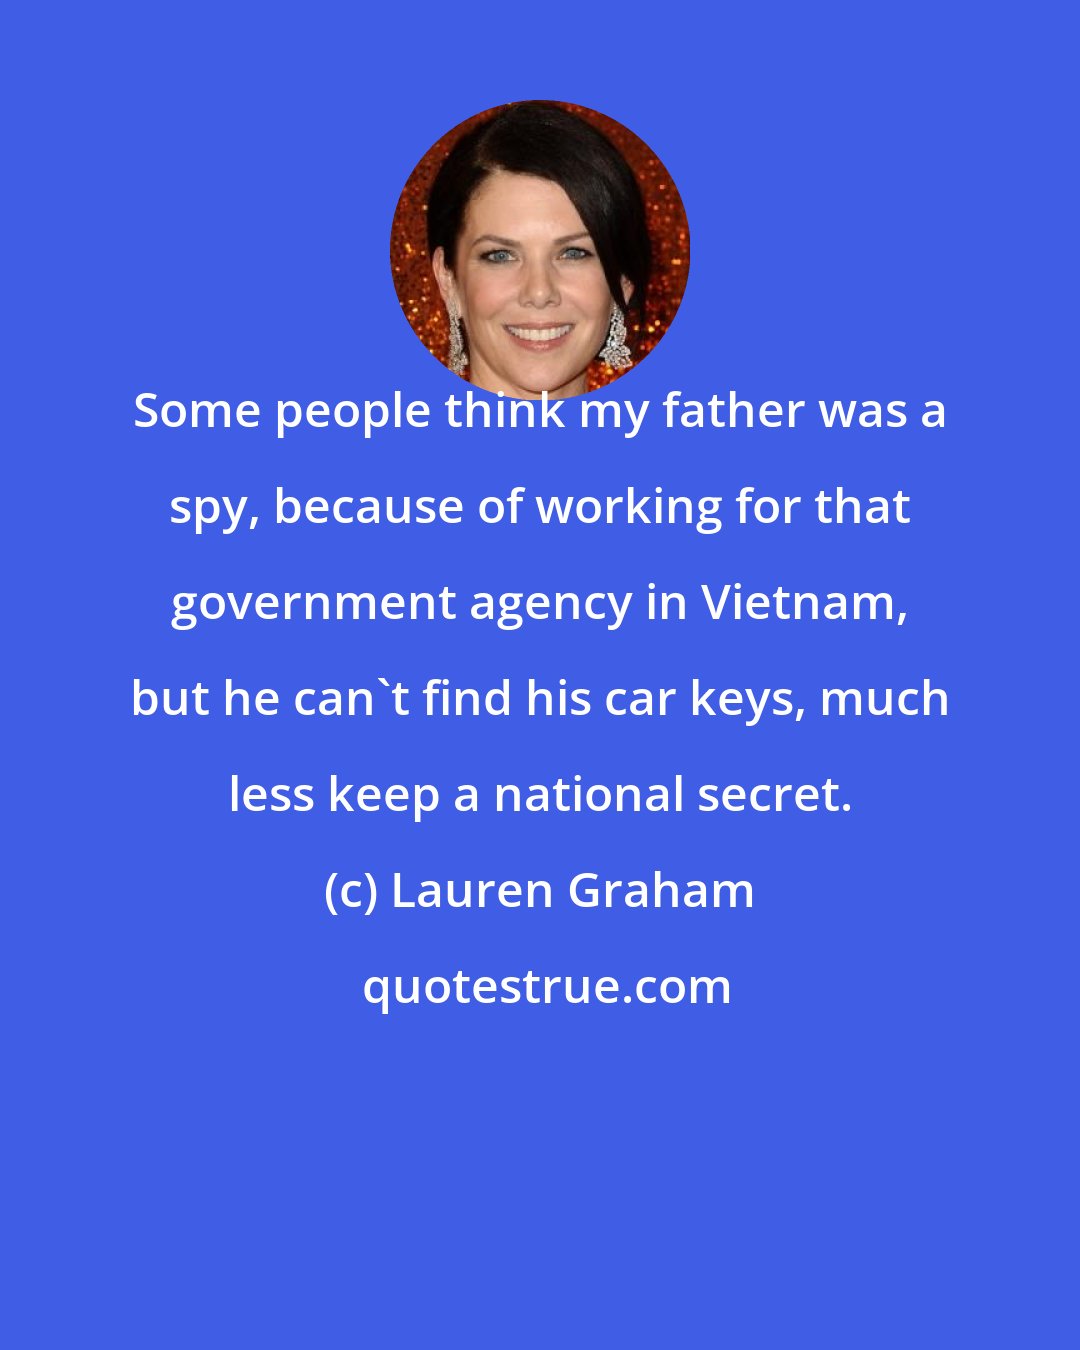 Lauren Graham: Some people think my father was a spy, because of working for that government agency in Vietnam, but he can't find his car keys, much less keep a national secret.